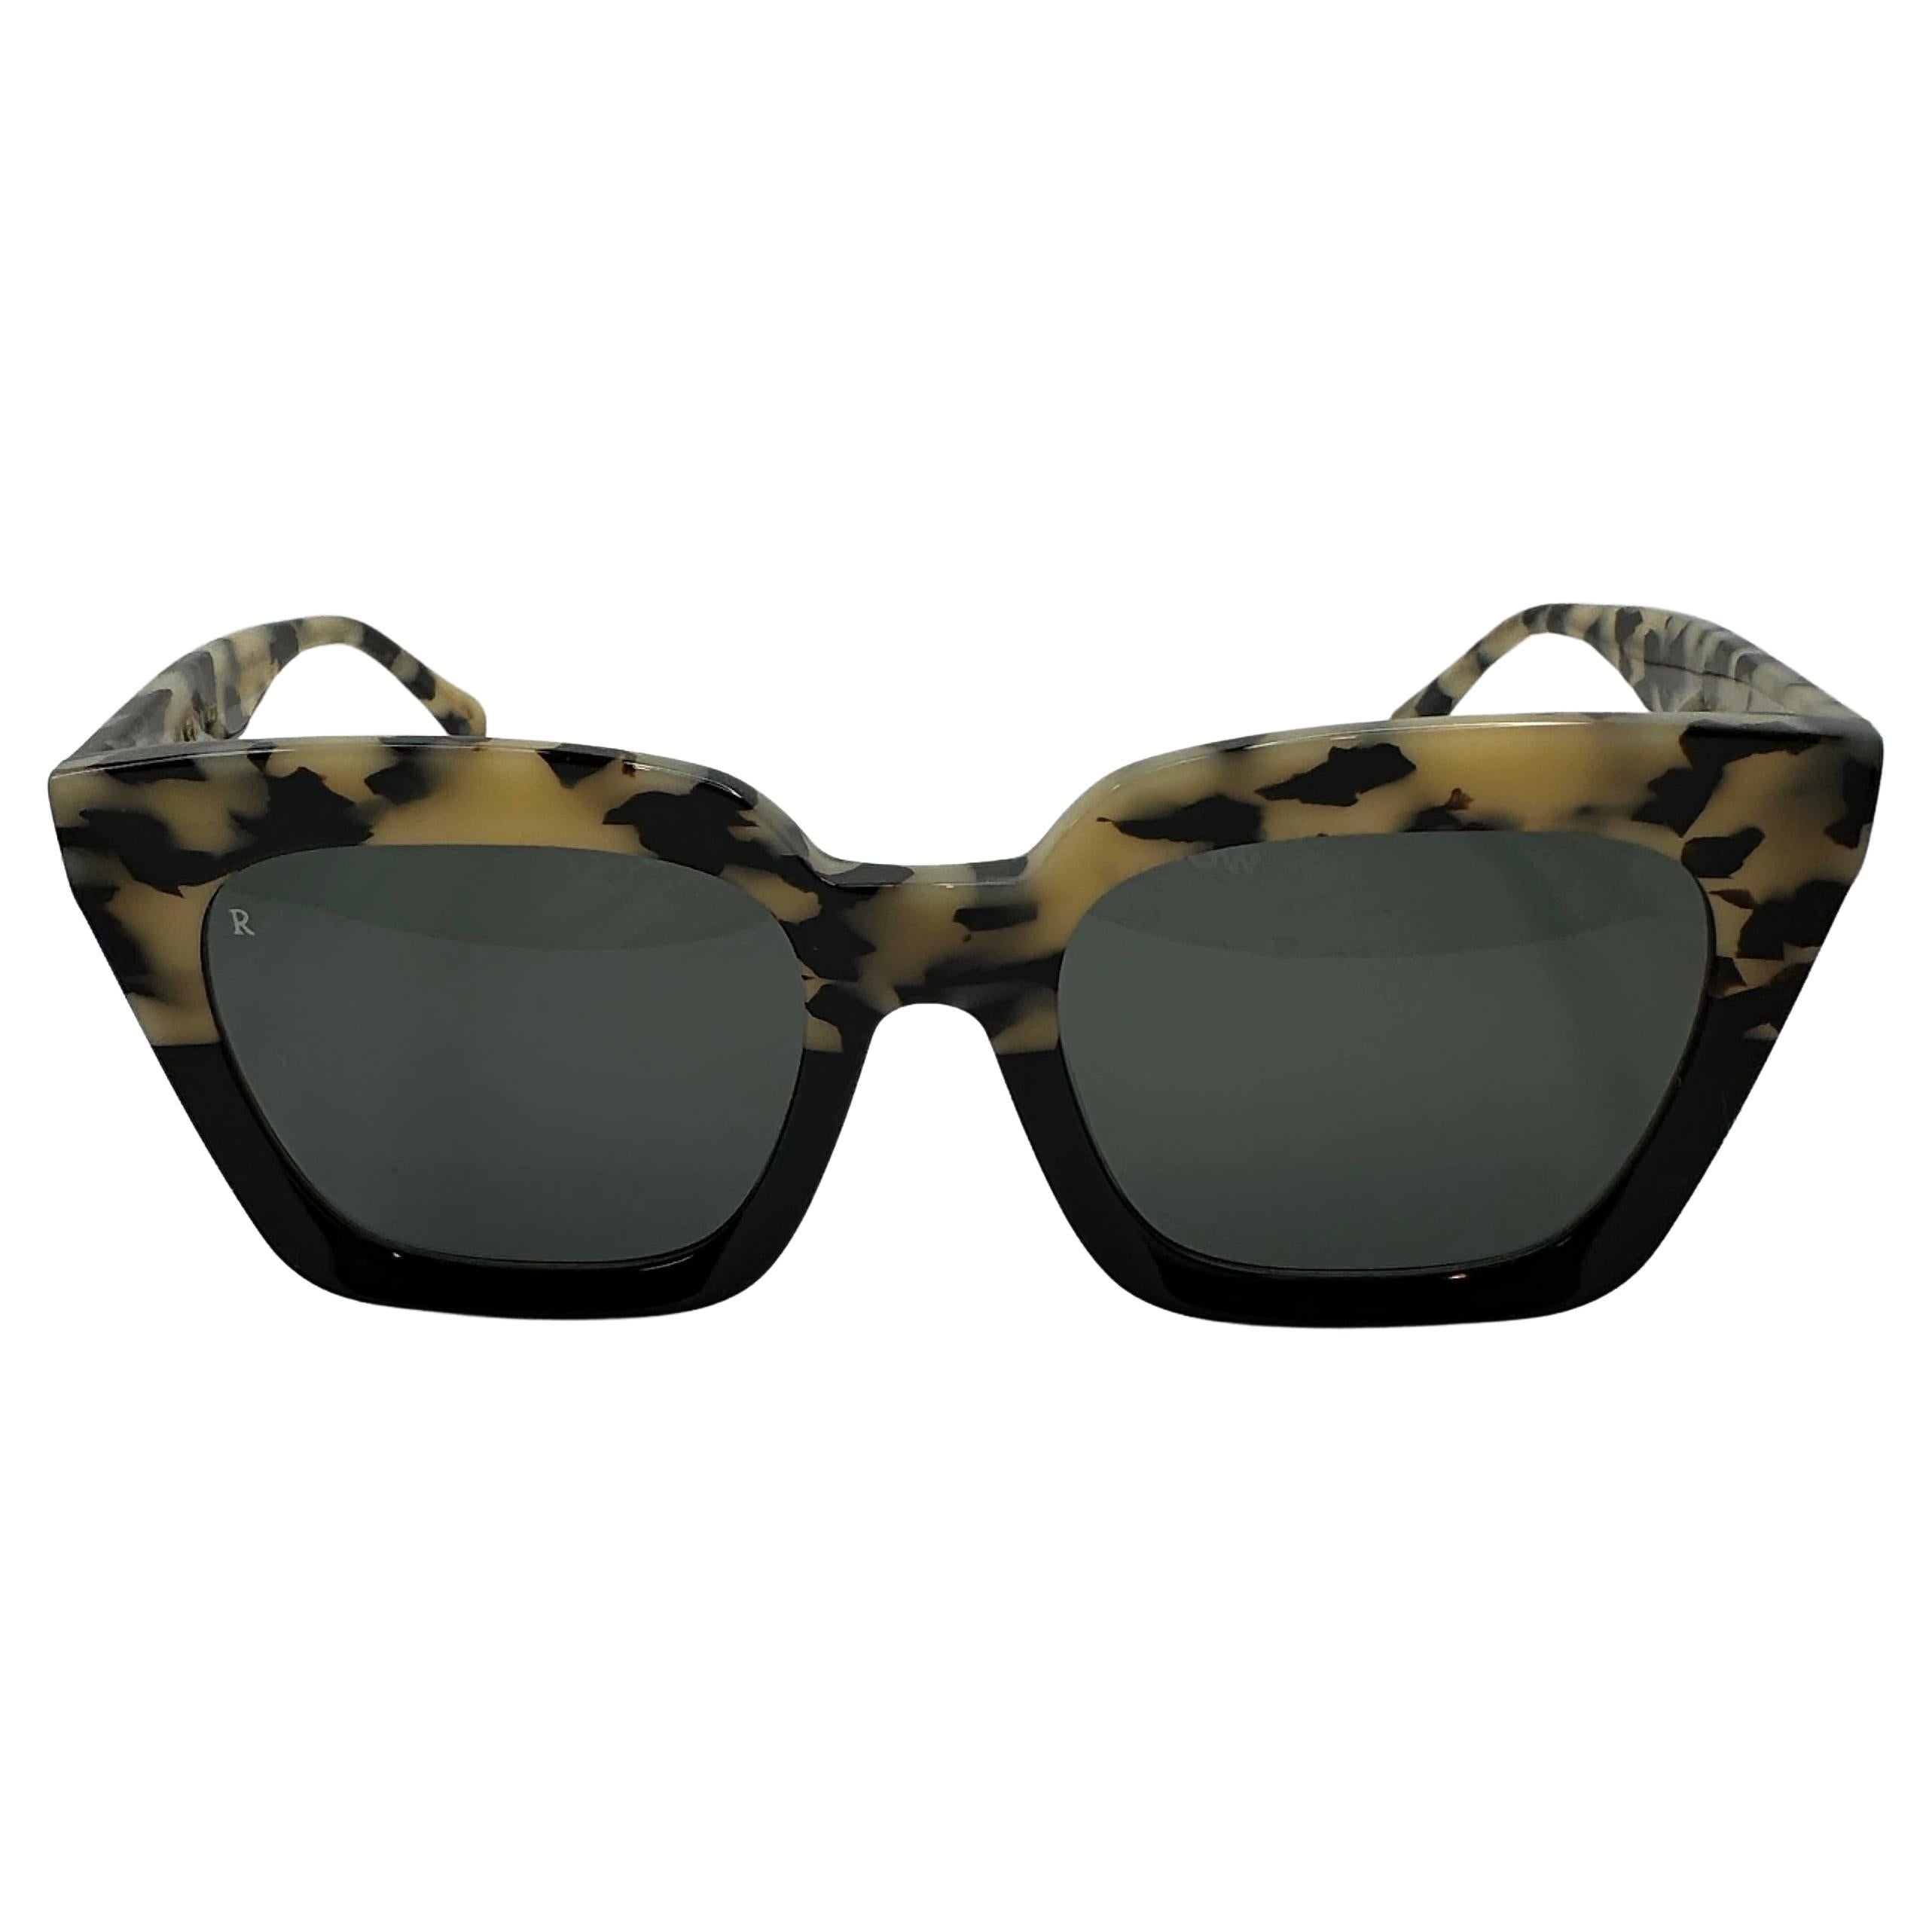 Raen "Limited Edition" Handmade Thick Lucite Black & Cream Sunglasses For Sale